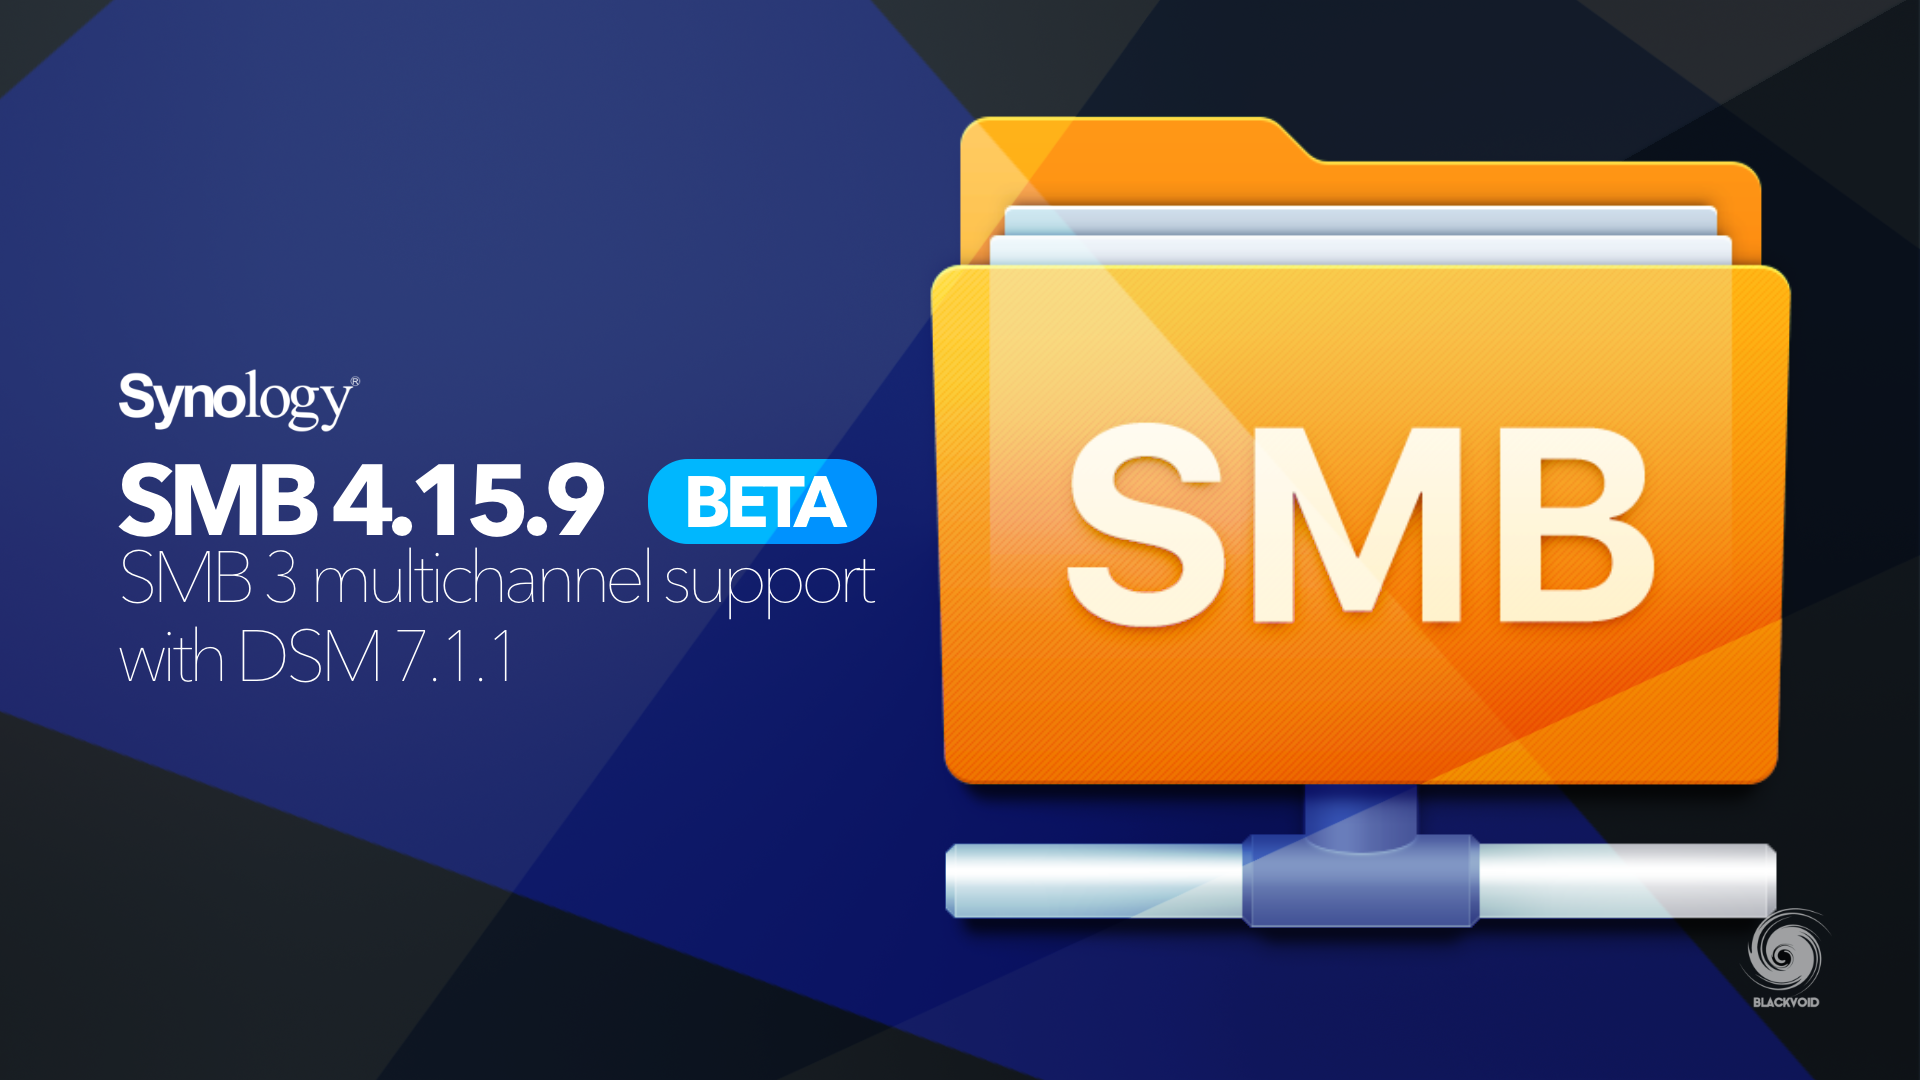 Synology SMB 4.15.9 package brings SMB multichannel